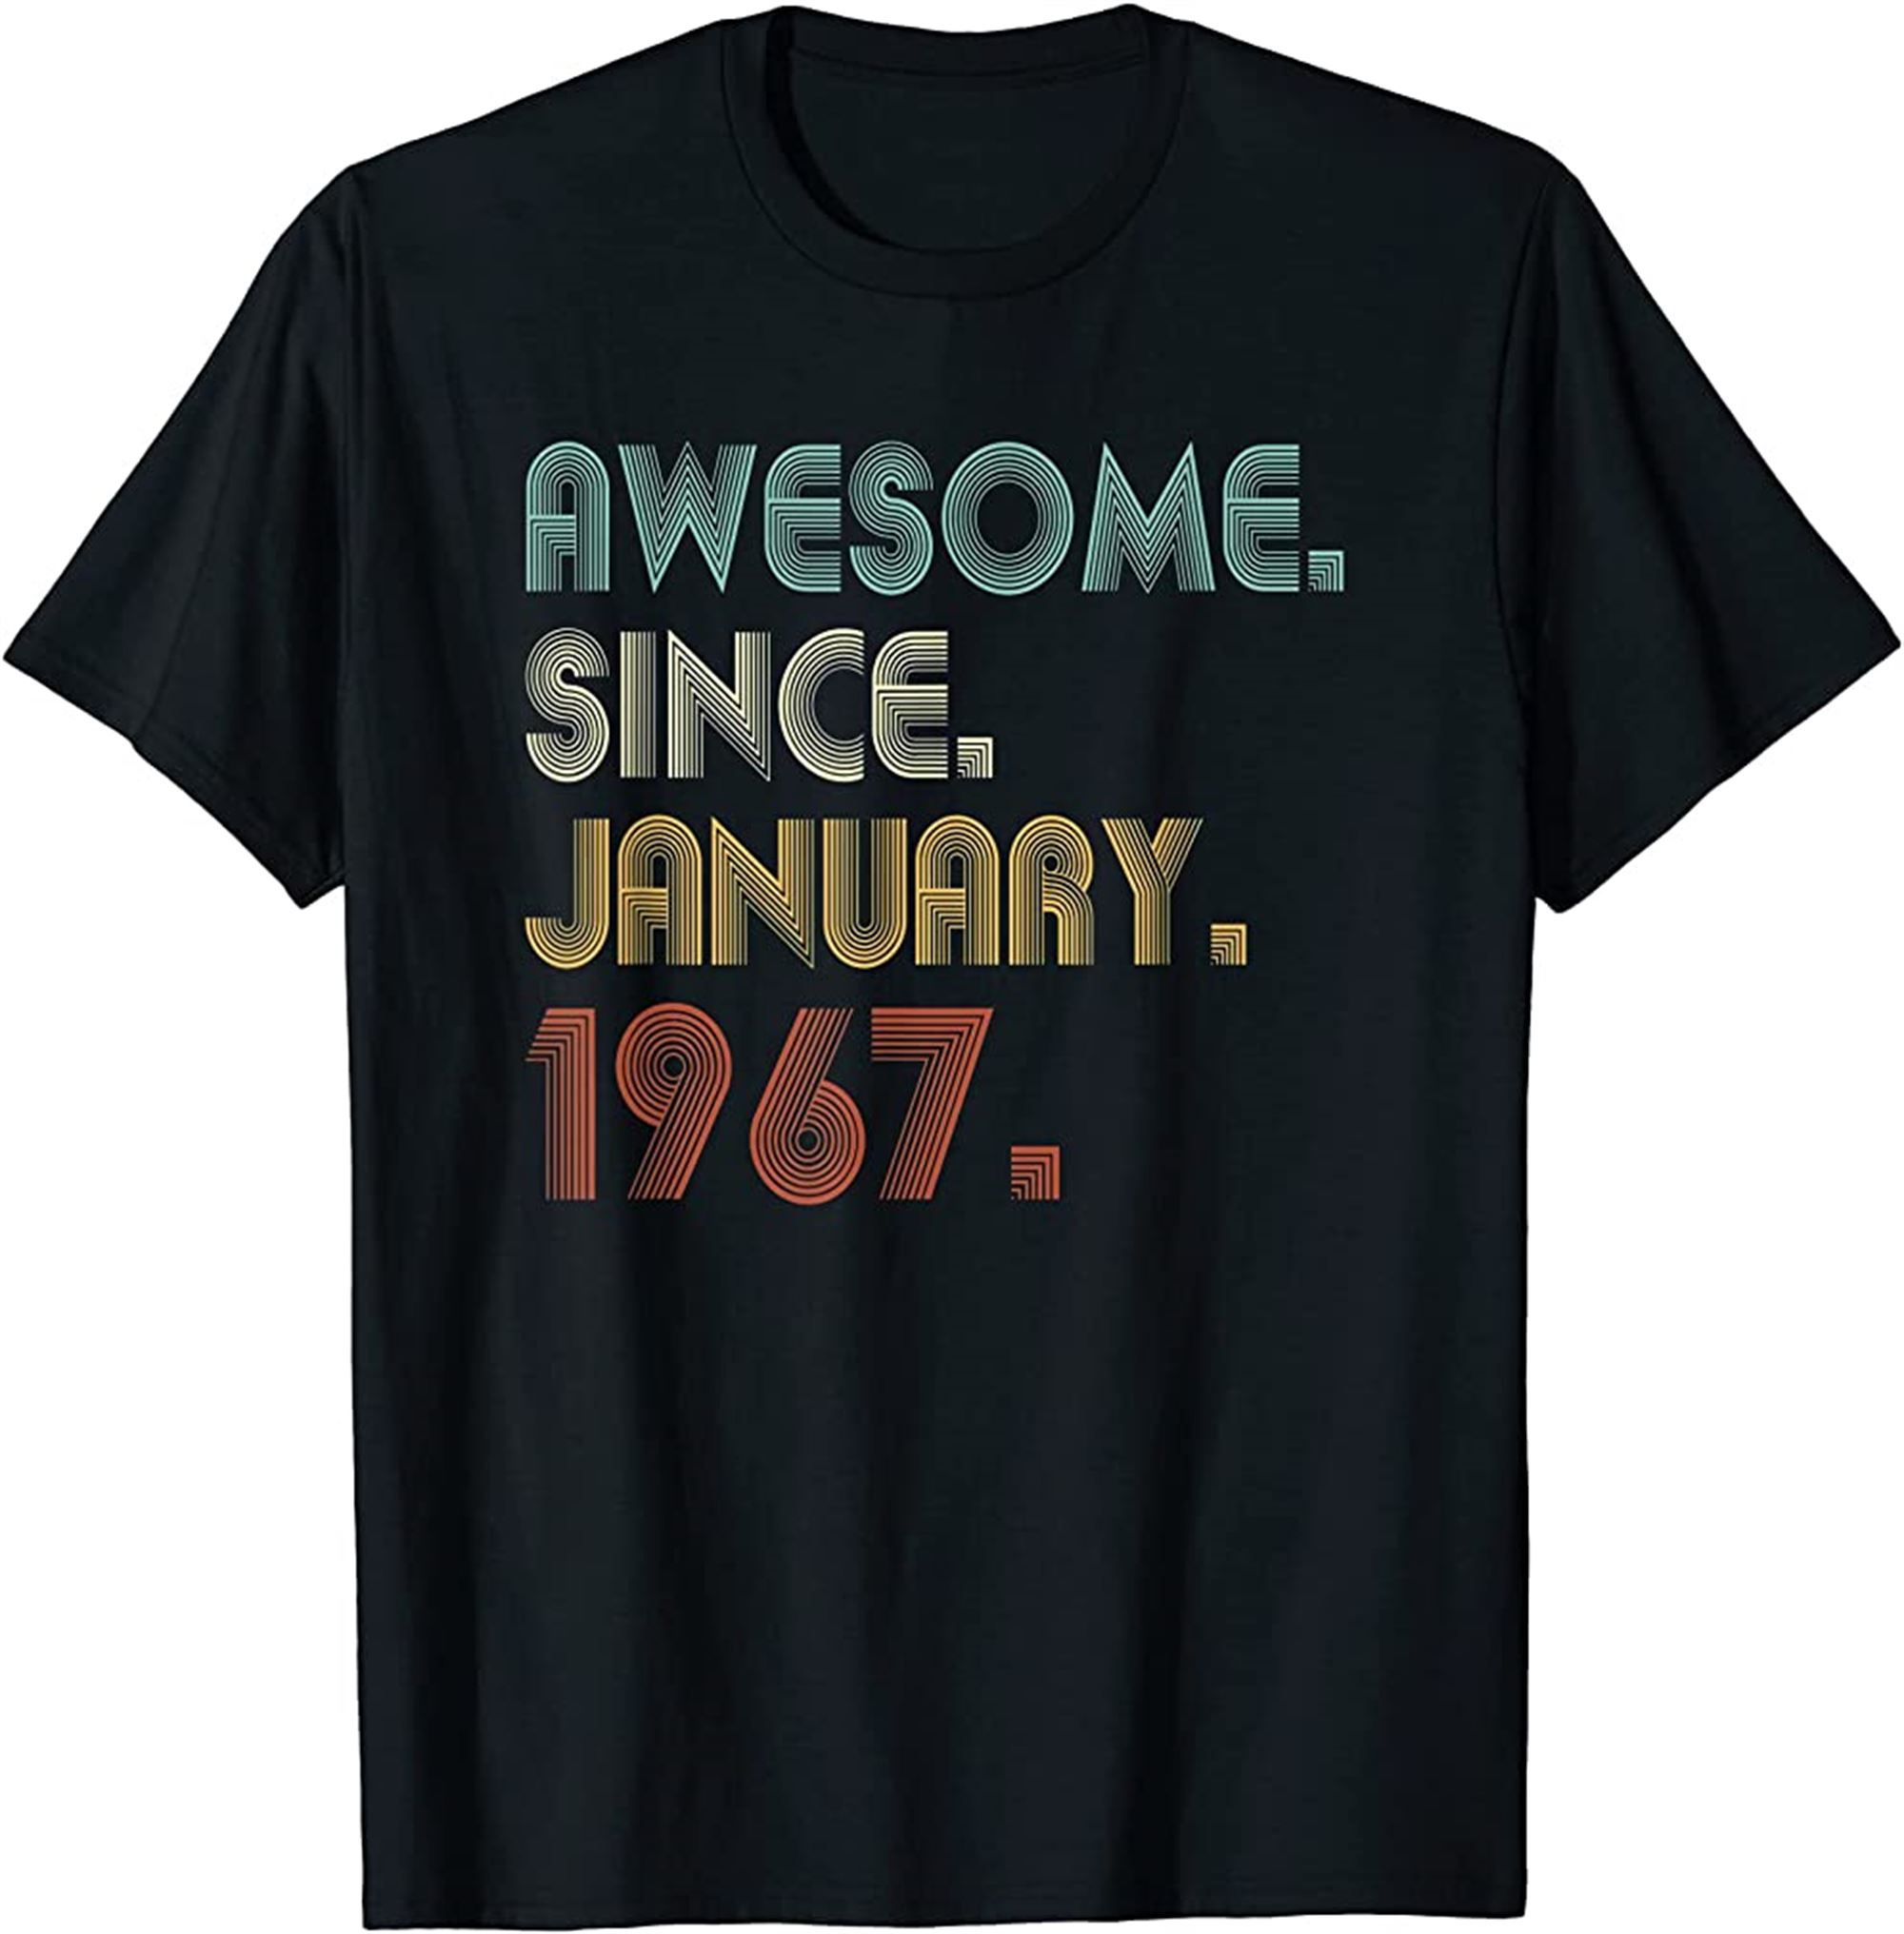 Awesome Since January 1967 55th Birthday 55 Years Old Gift T-shirt Plus Size Up To 5xl